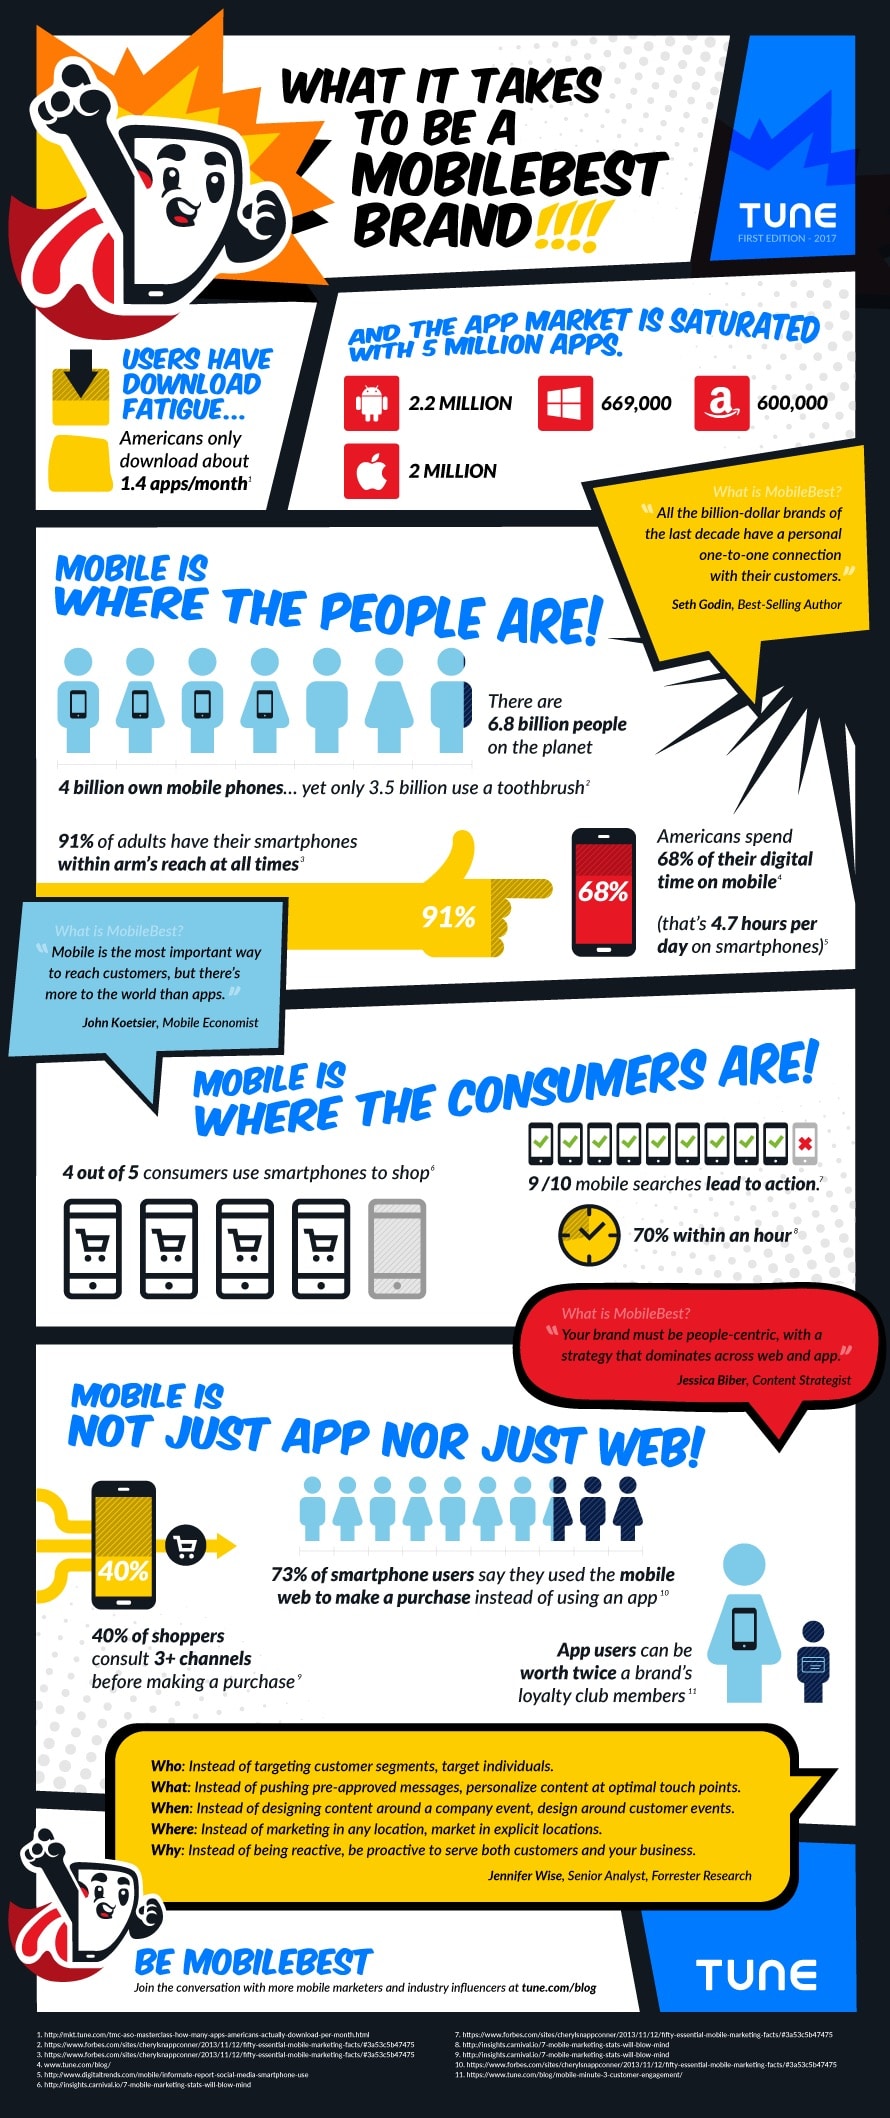 Infographic of mobilebest brand best practices